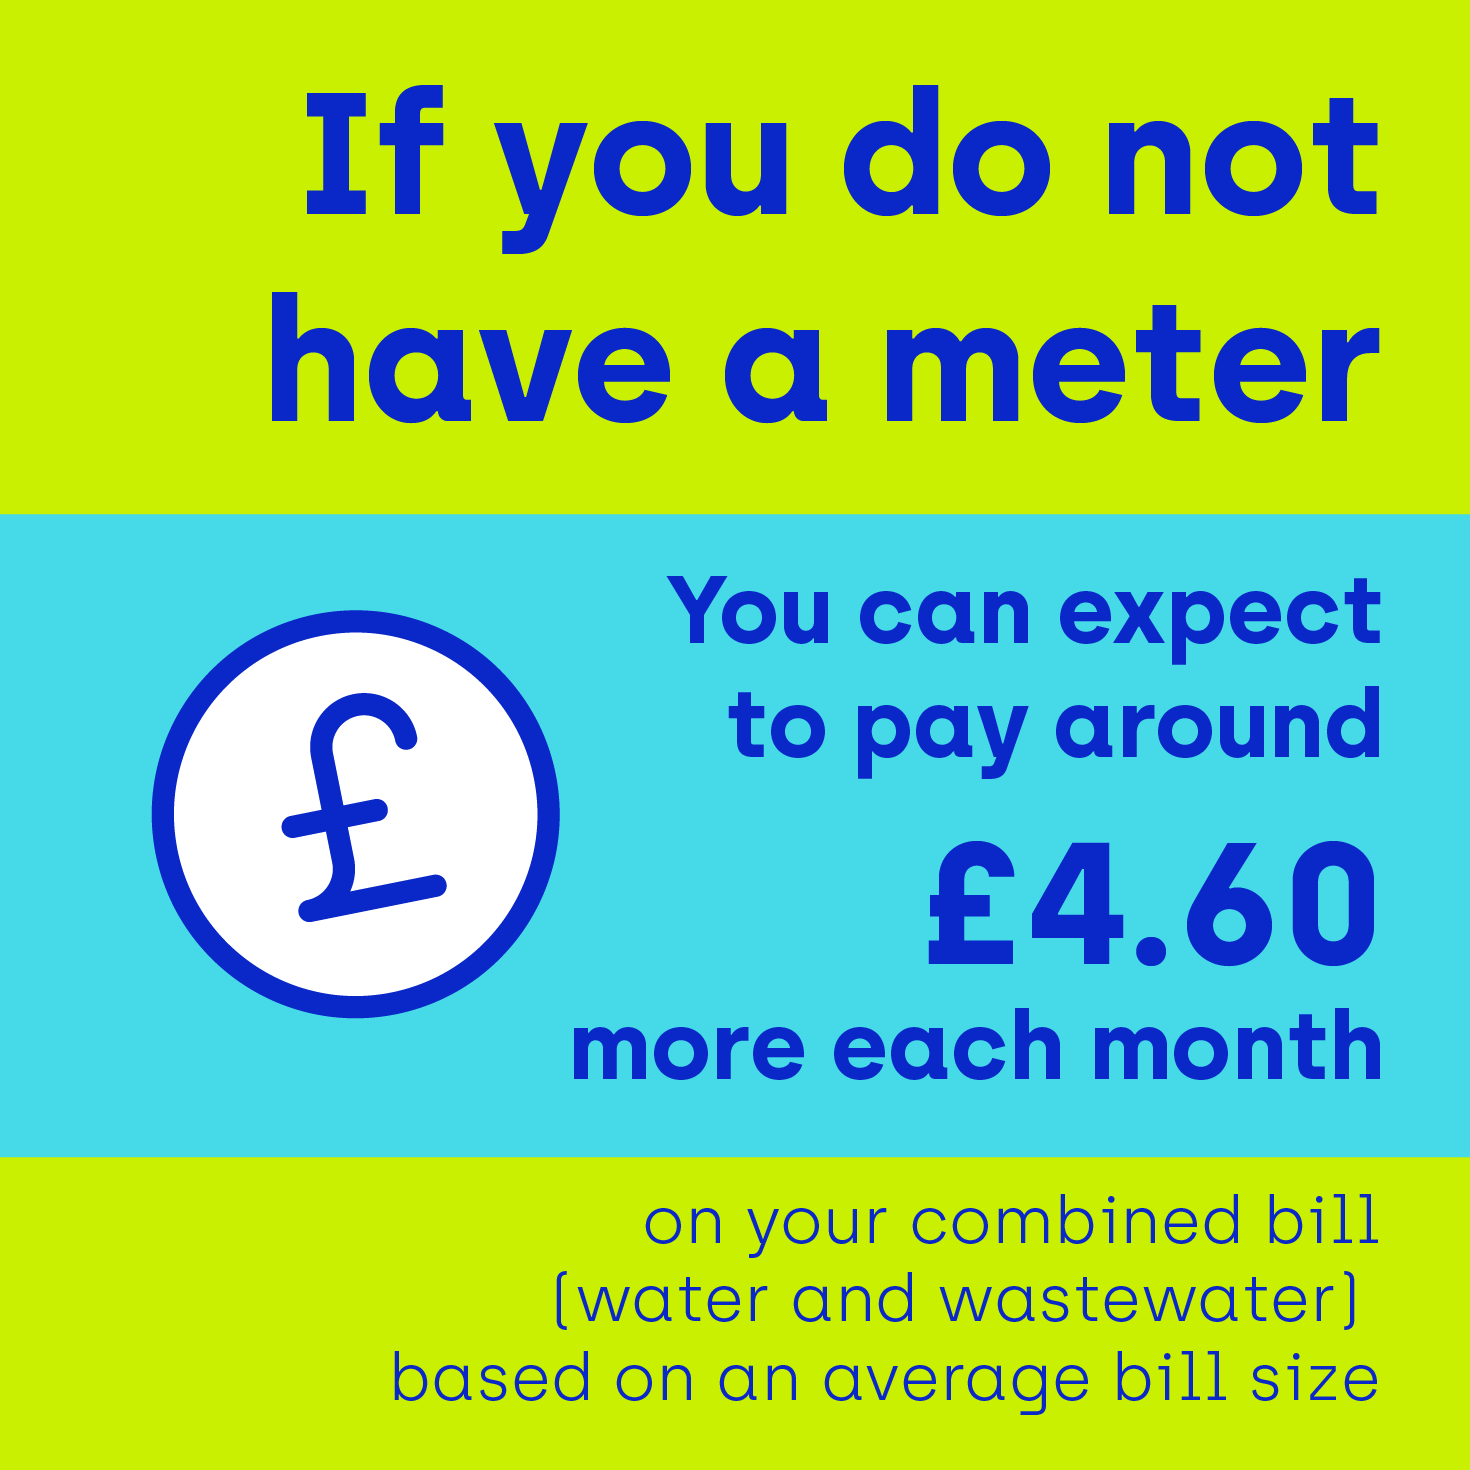 If you don't have a meter, you could pay £4.60 more each month